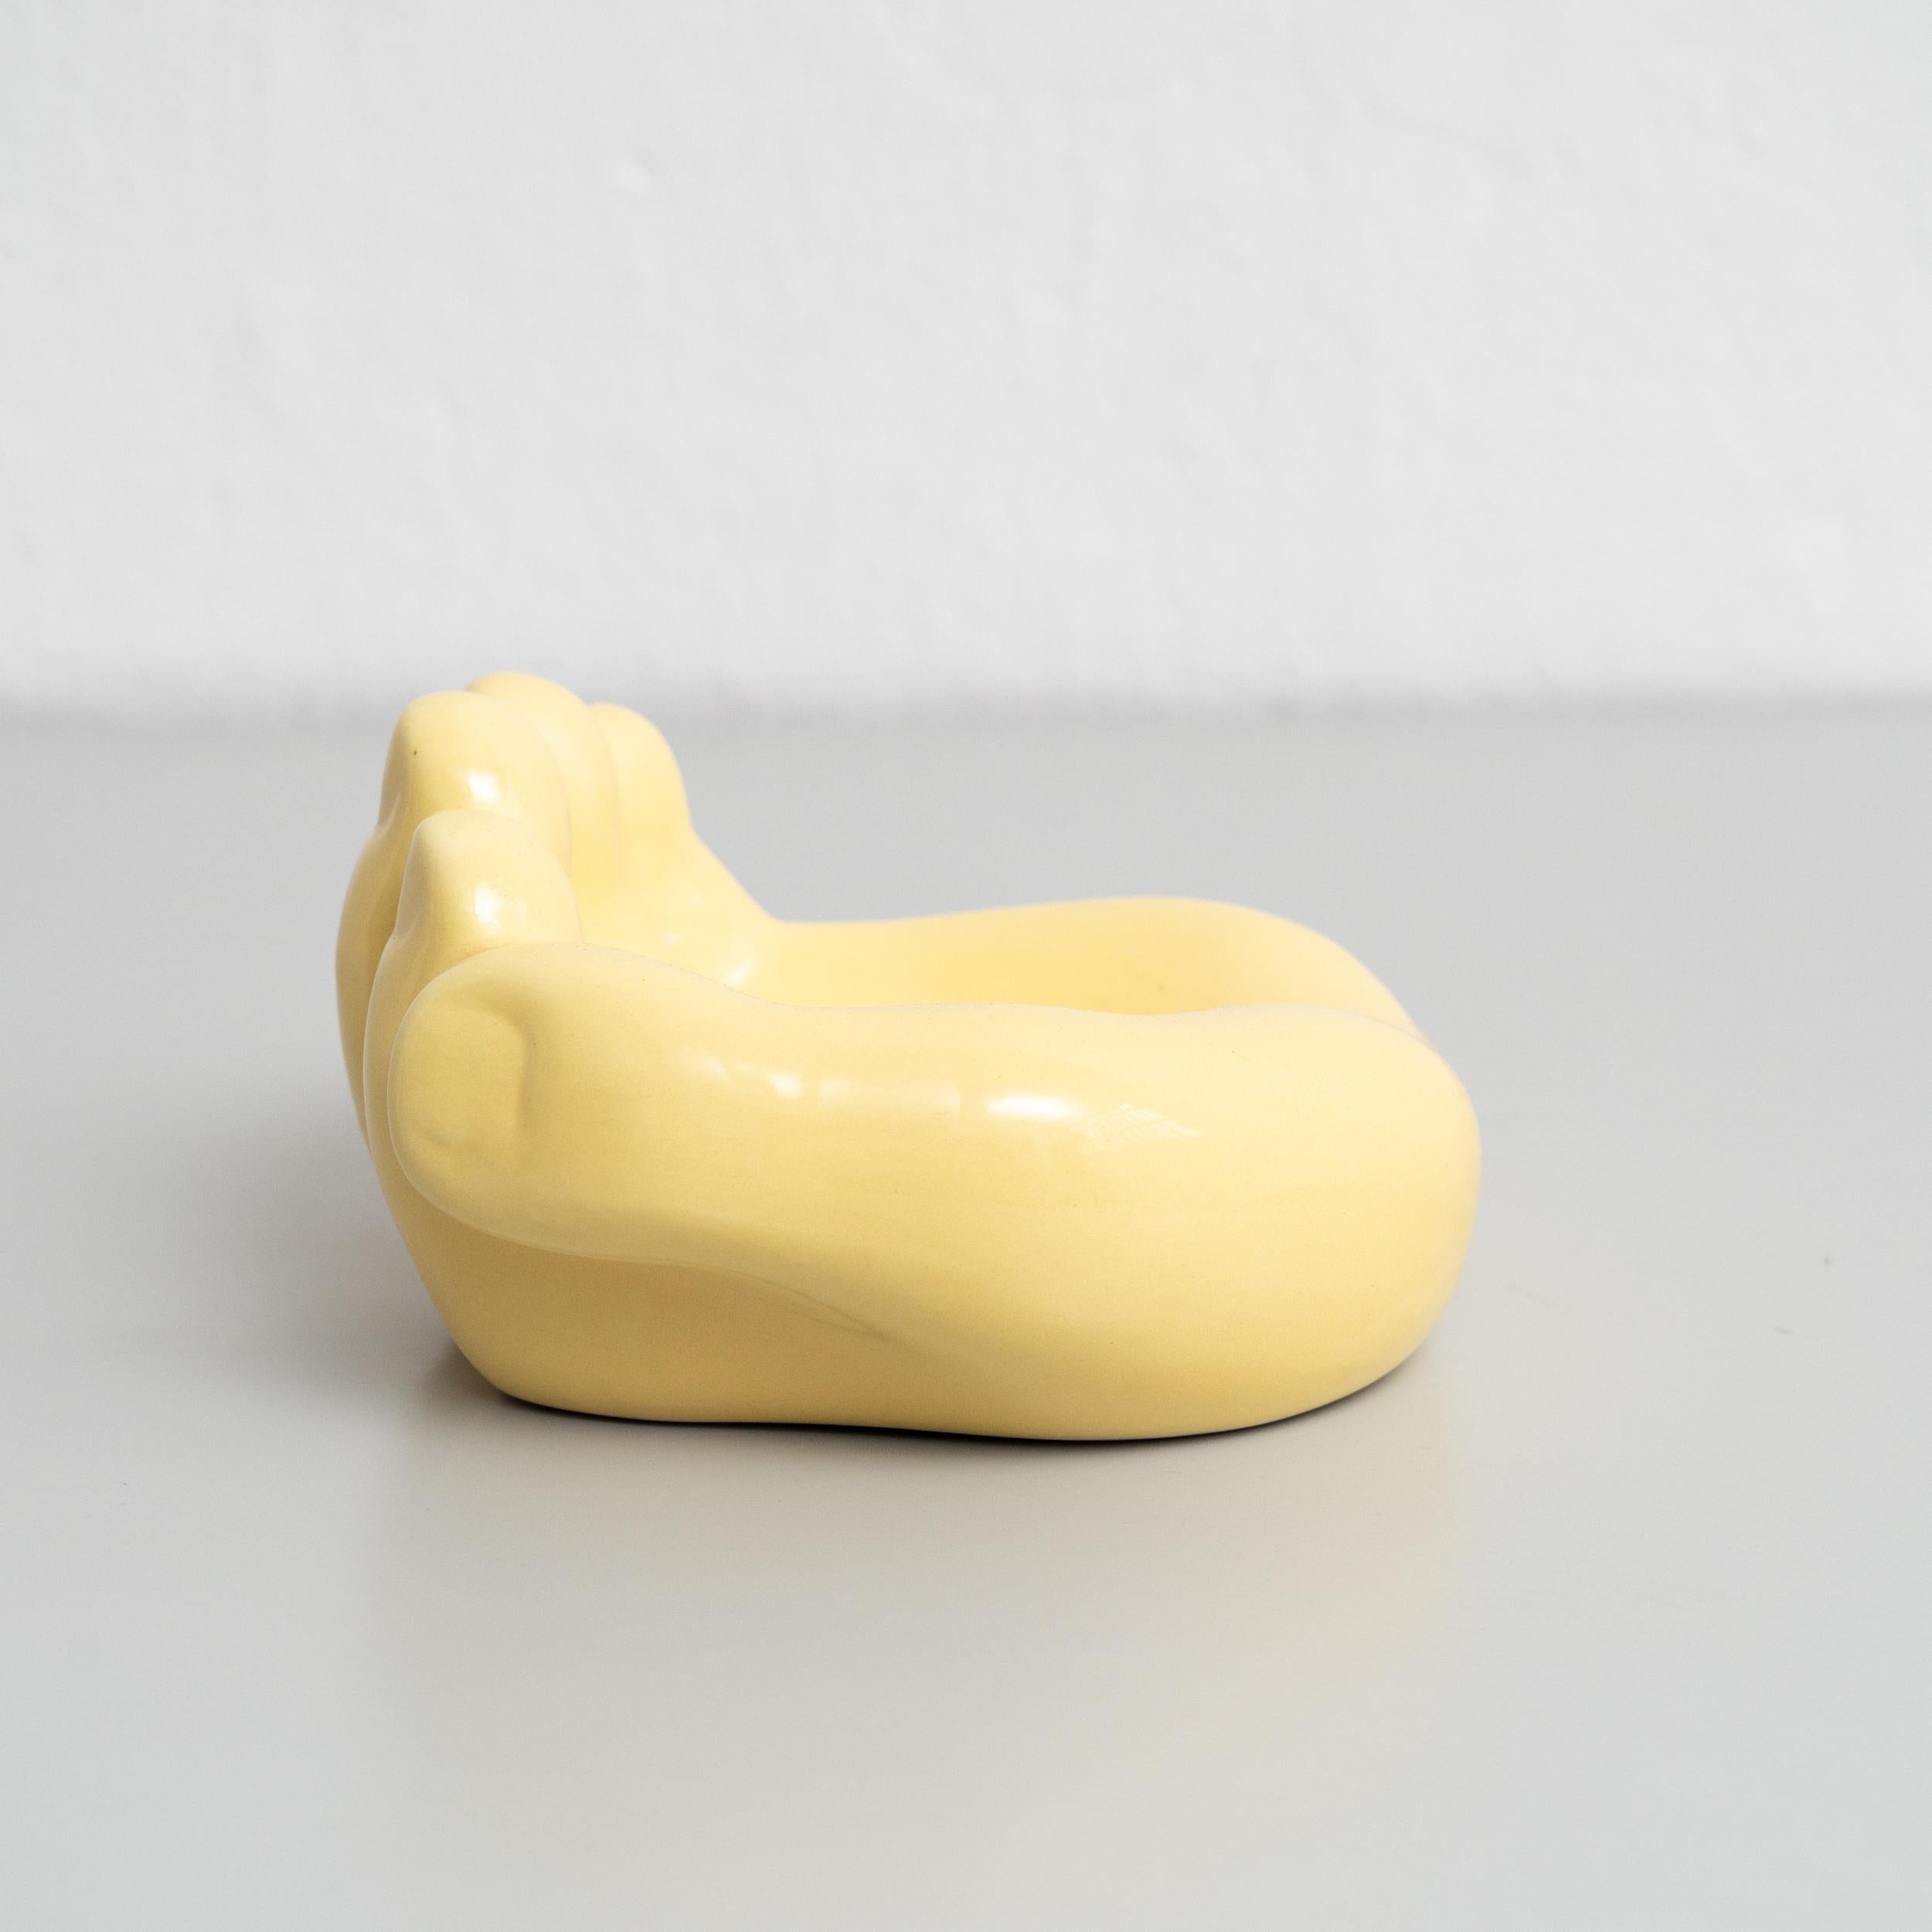 Mid-20th Century Ashtray After Georges Jouve Ceramic in Yellow, circa 1950 For Sale